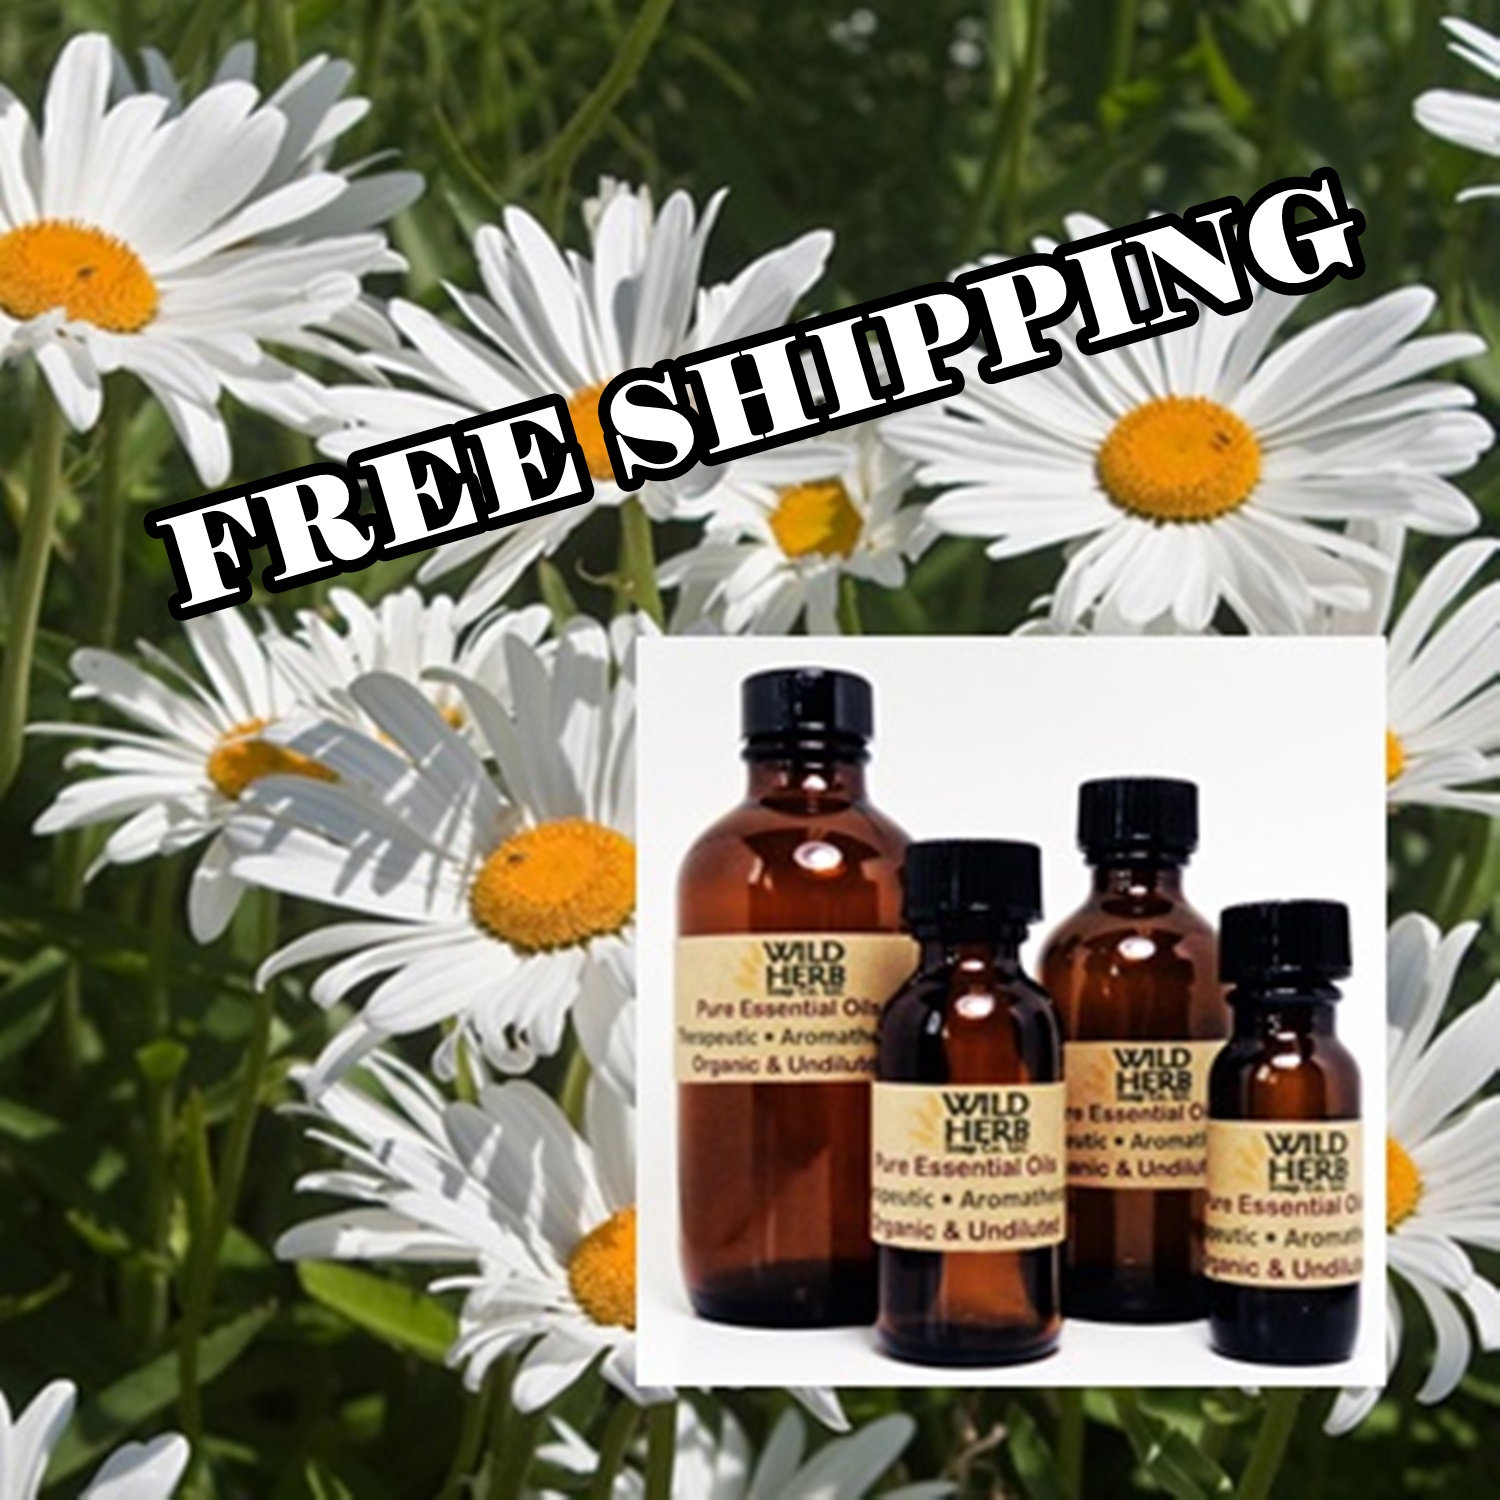 The Vitamin Shoppe Roman Chamomile Comforting & Relaxing Aromatherapy 100% Pure Essential Oil (1 oz)